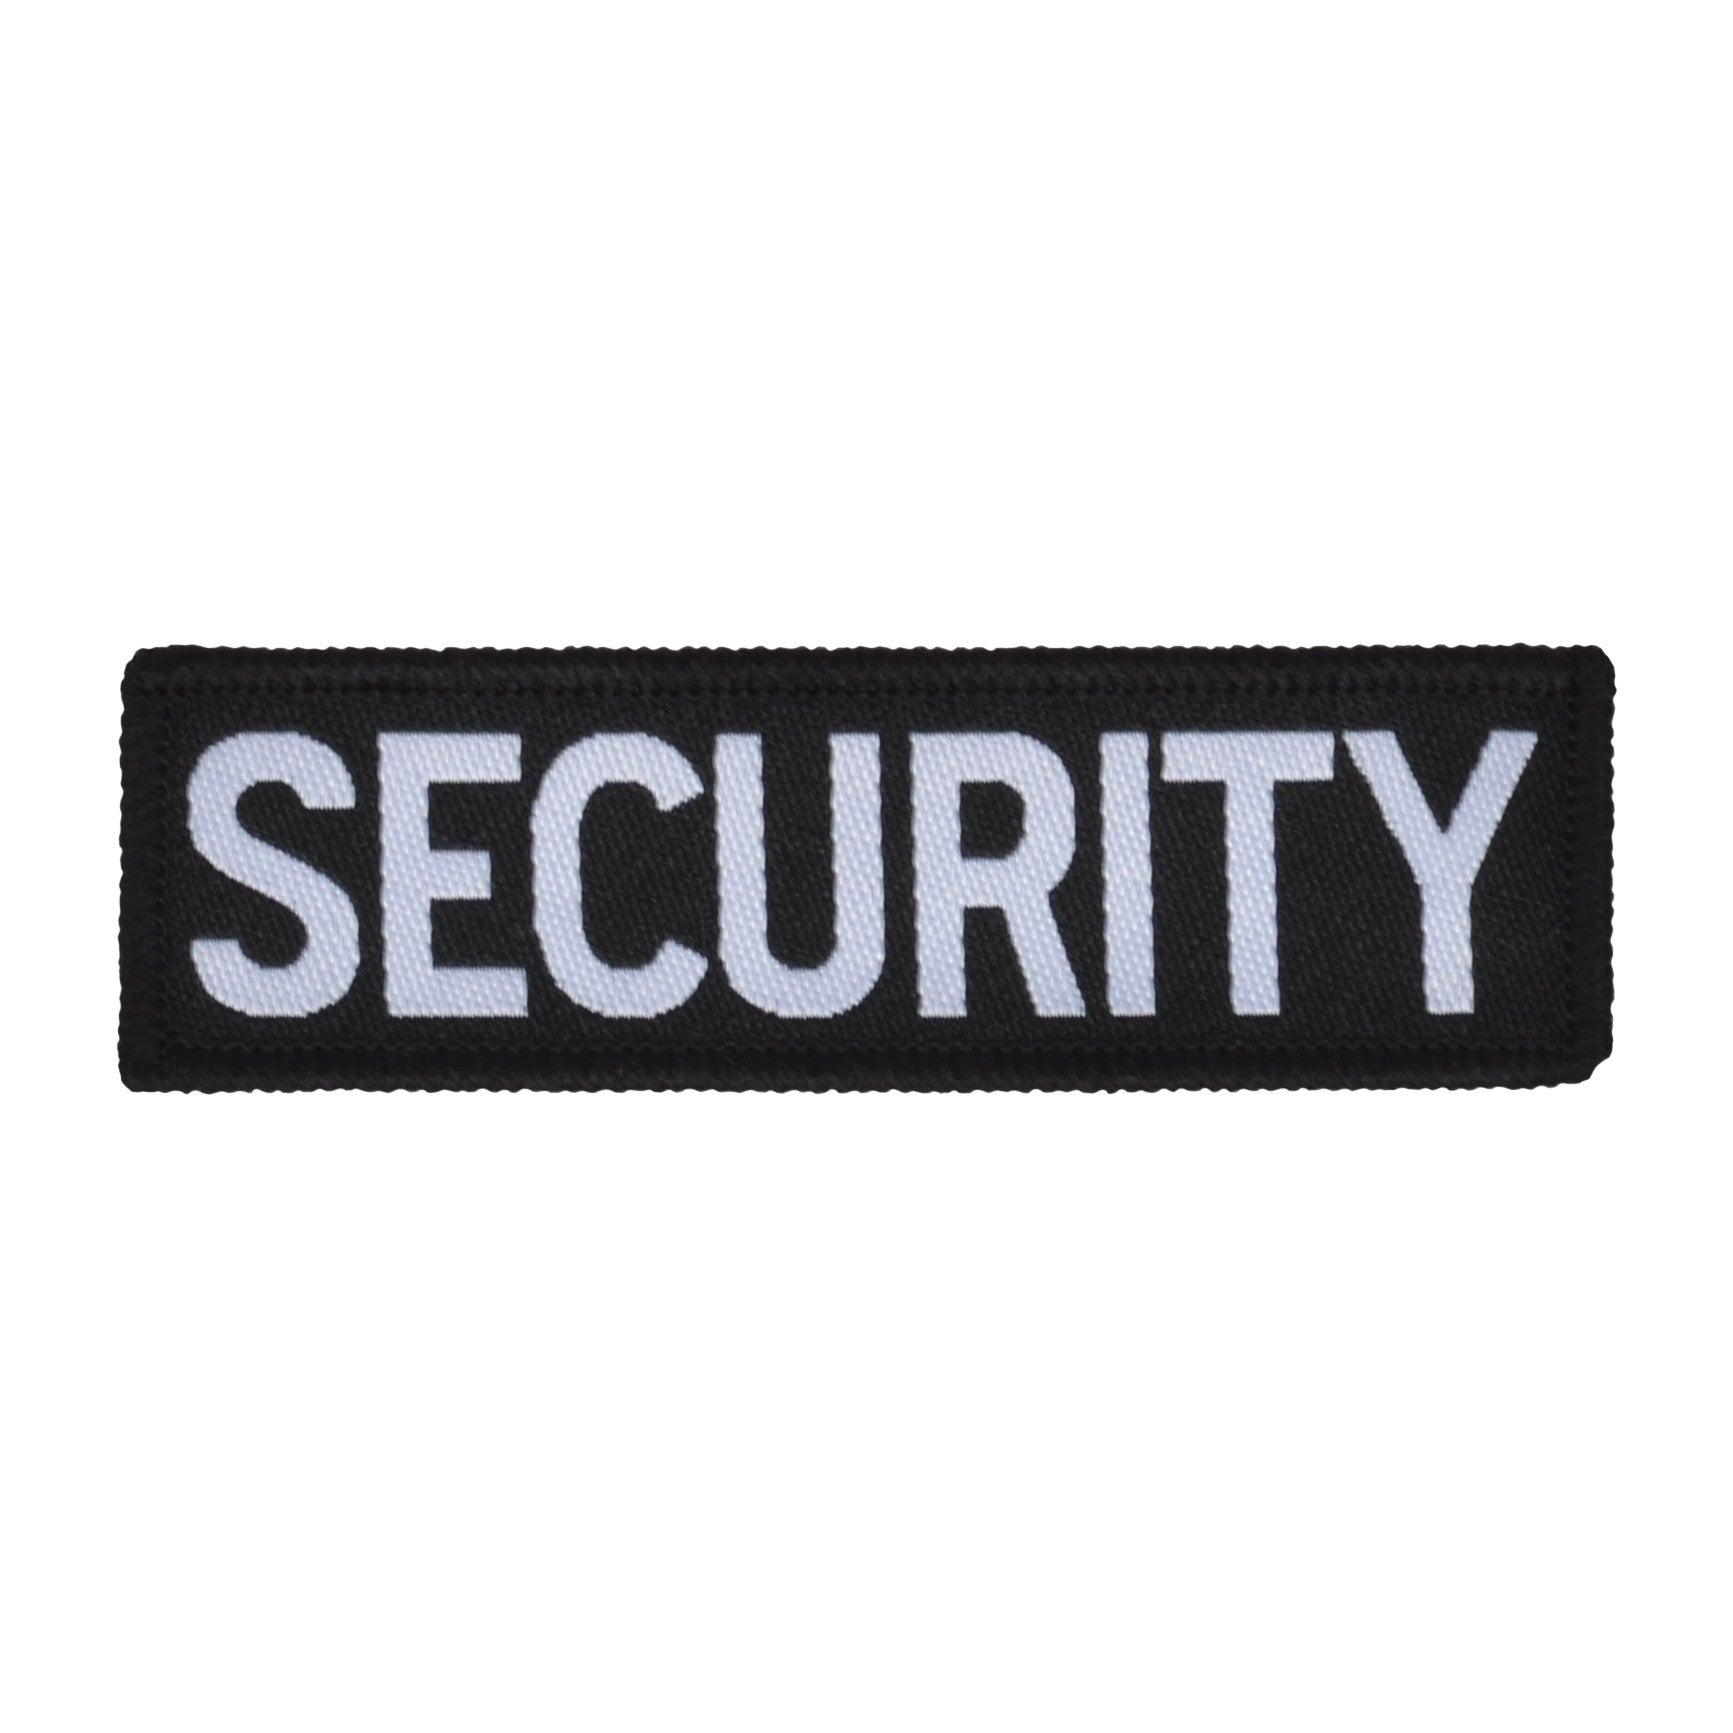 Security Badge - Sew on Badge - Supervisor Badge - Woven Badge ...